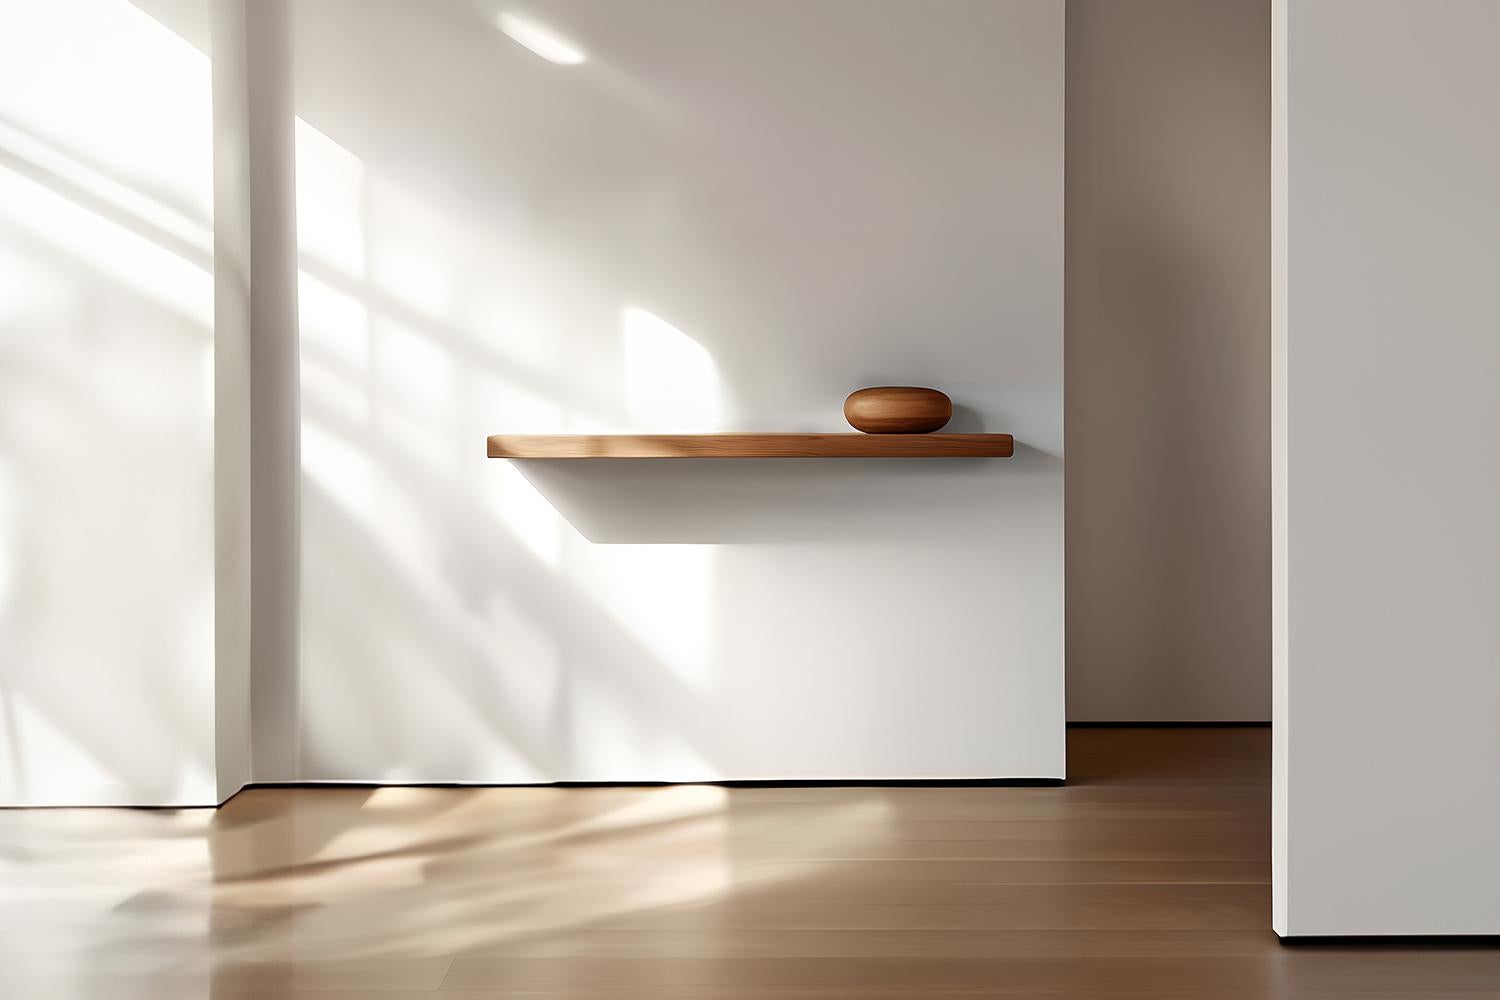 Veneer Individual Floating Shelf with One Sculptural Wooden Pebble, Sereno by Nono For Sale